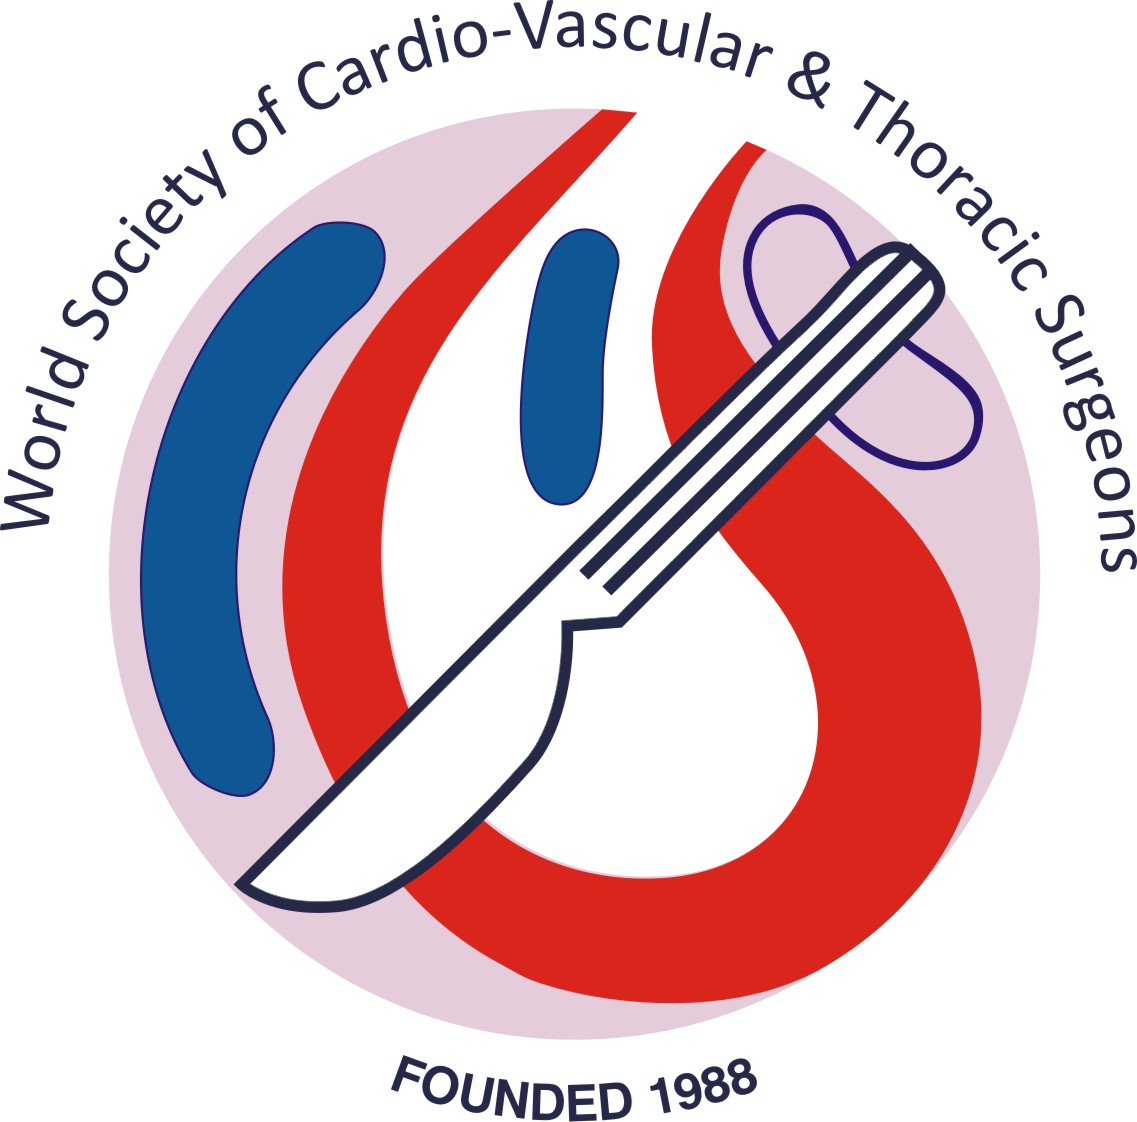 logo for World Society of Cardiovascular & Thoracic Surgeons